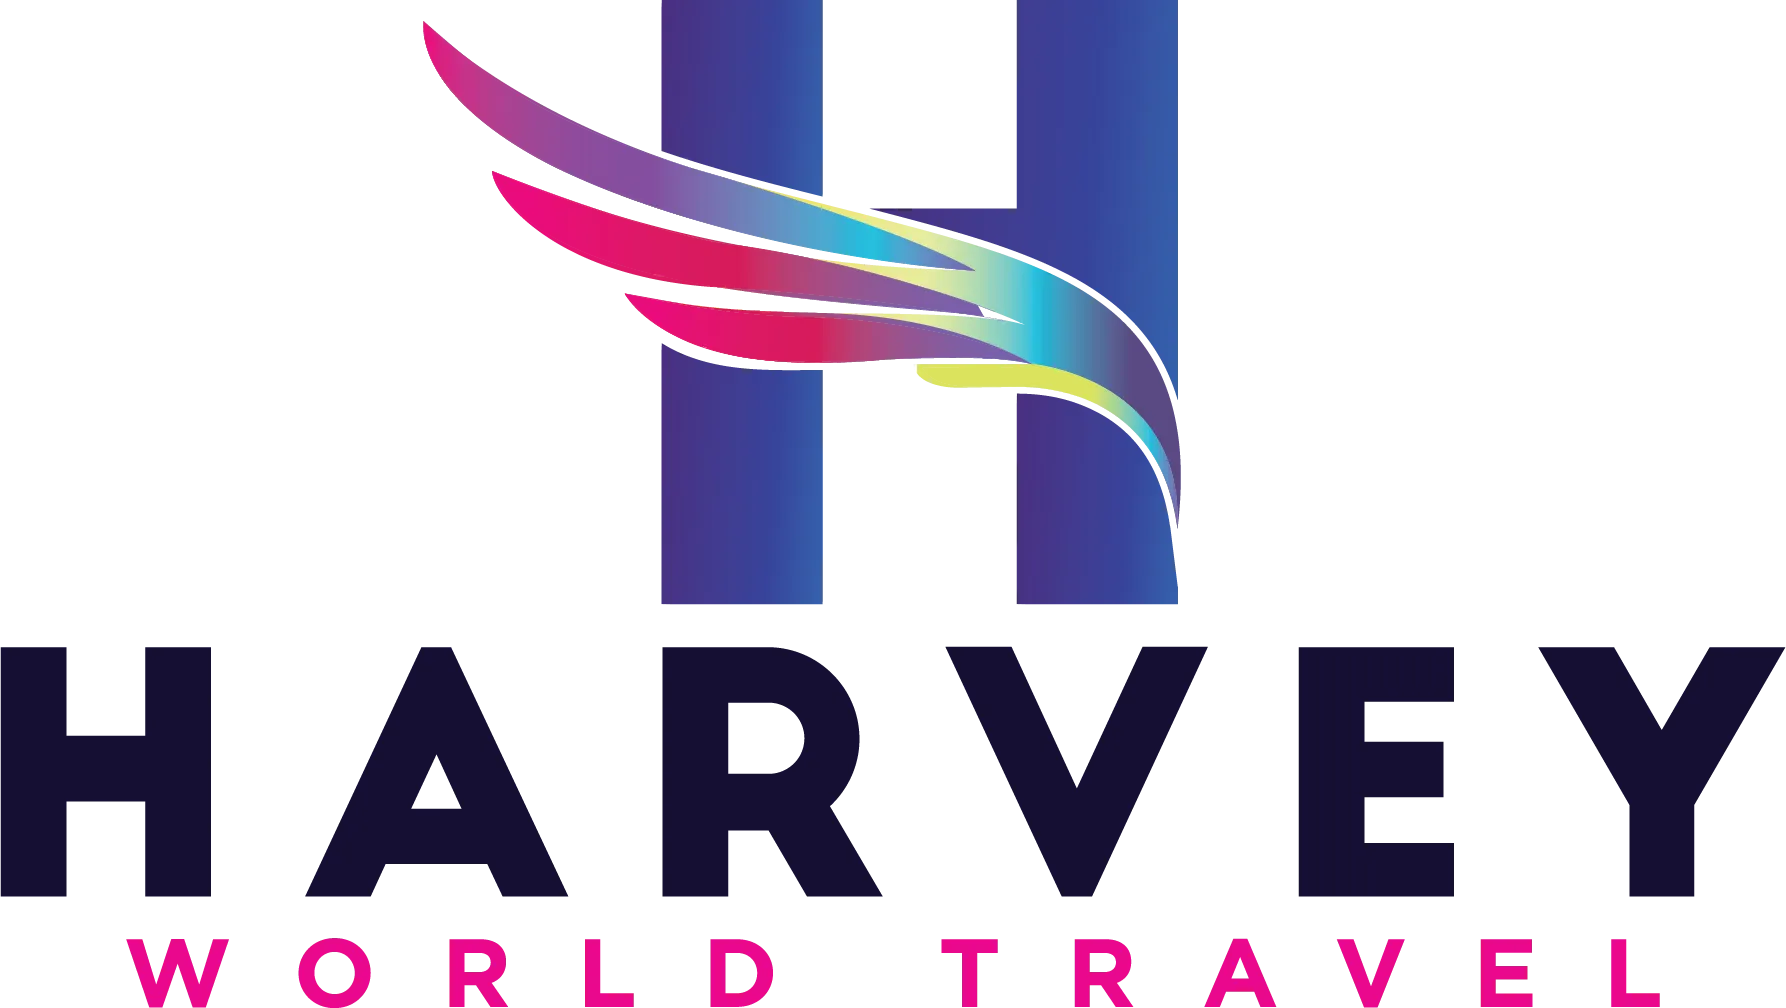 harvey world travel cape town branches